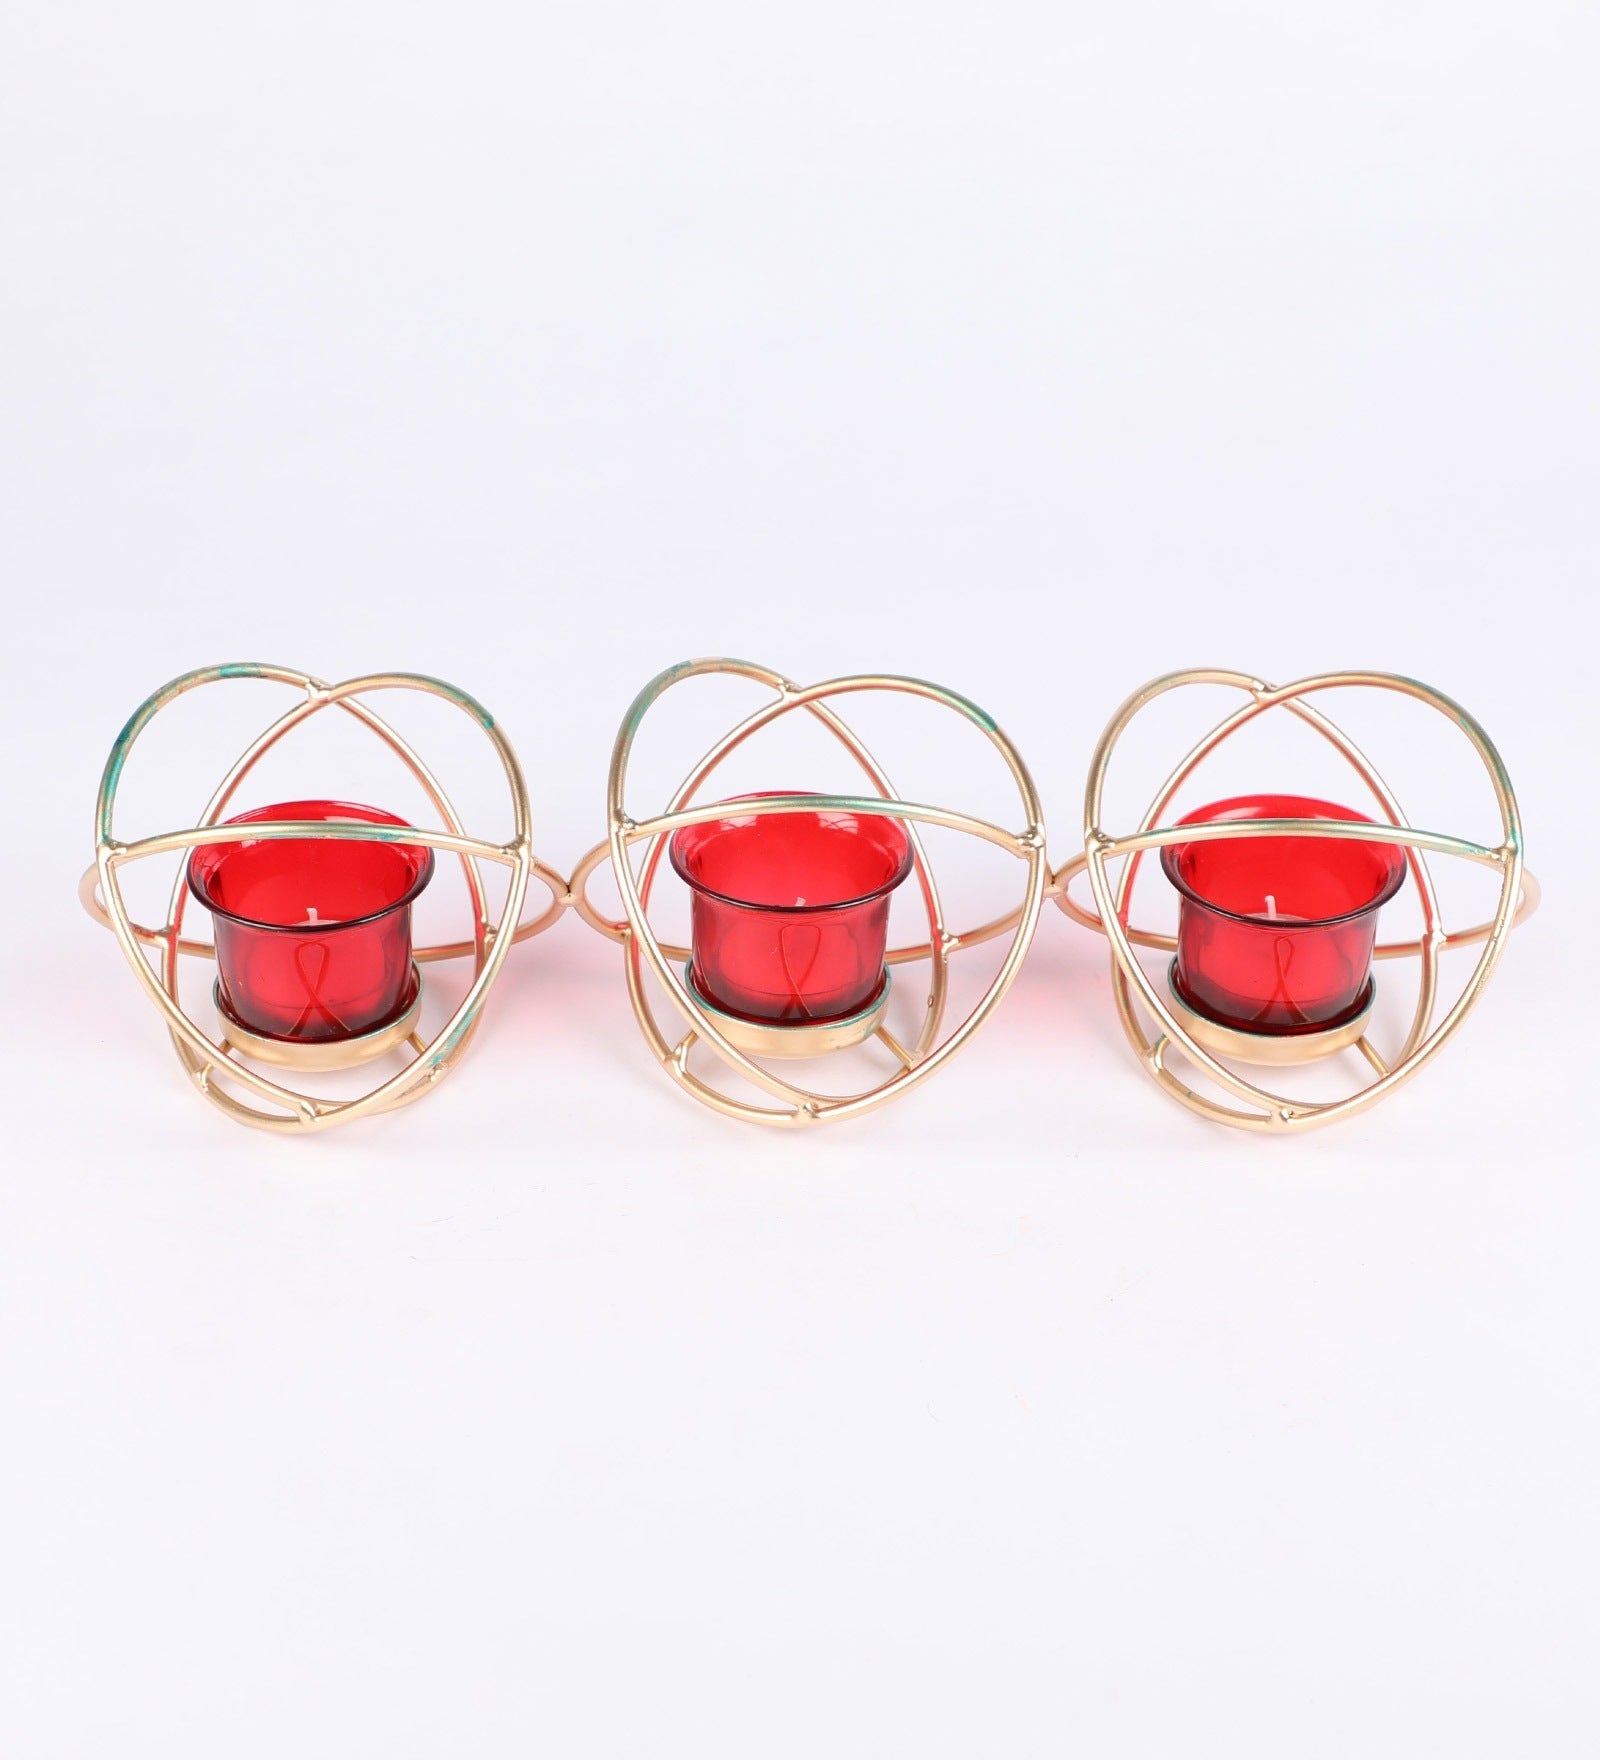 Hosley Iron Tealight Candle Holder With Red Glass cup and free Tealight for Home Decoration